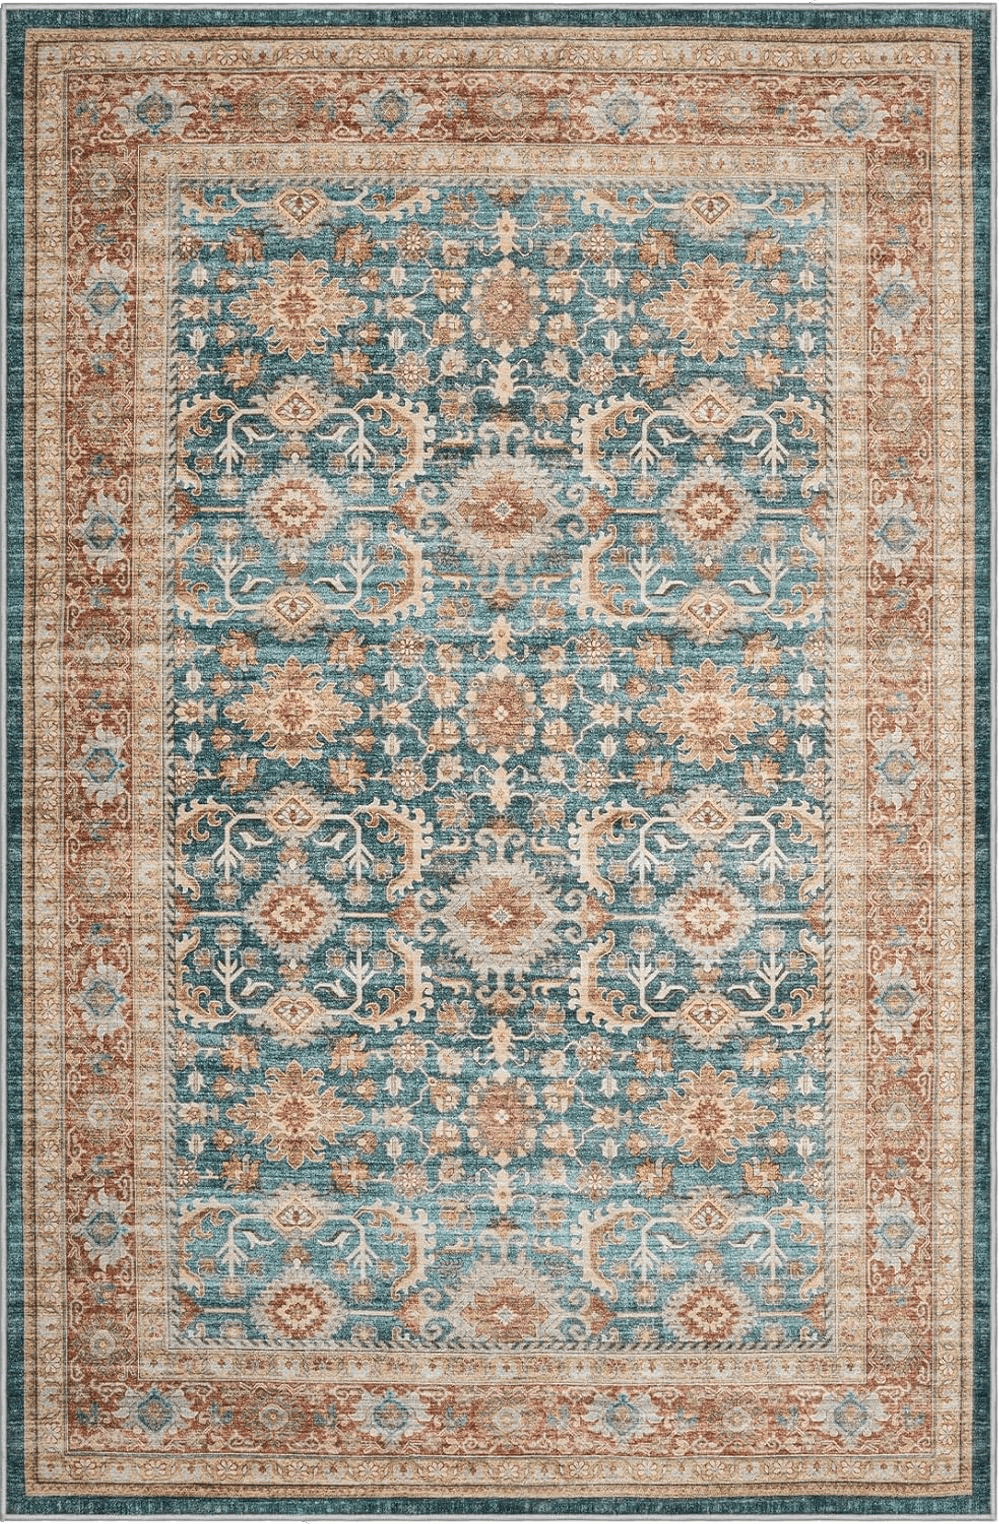 Oriental 5x7 Area Rug Living Room Rugs: Machine Washable Large Carpet for Bedroom Boho Floral Print Distressed with Non-Slip Backing Stain Resistant Large Rugs for Dining Room Home Decor (Gold Multi 5'x7')